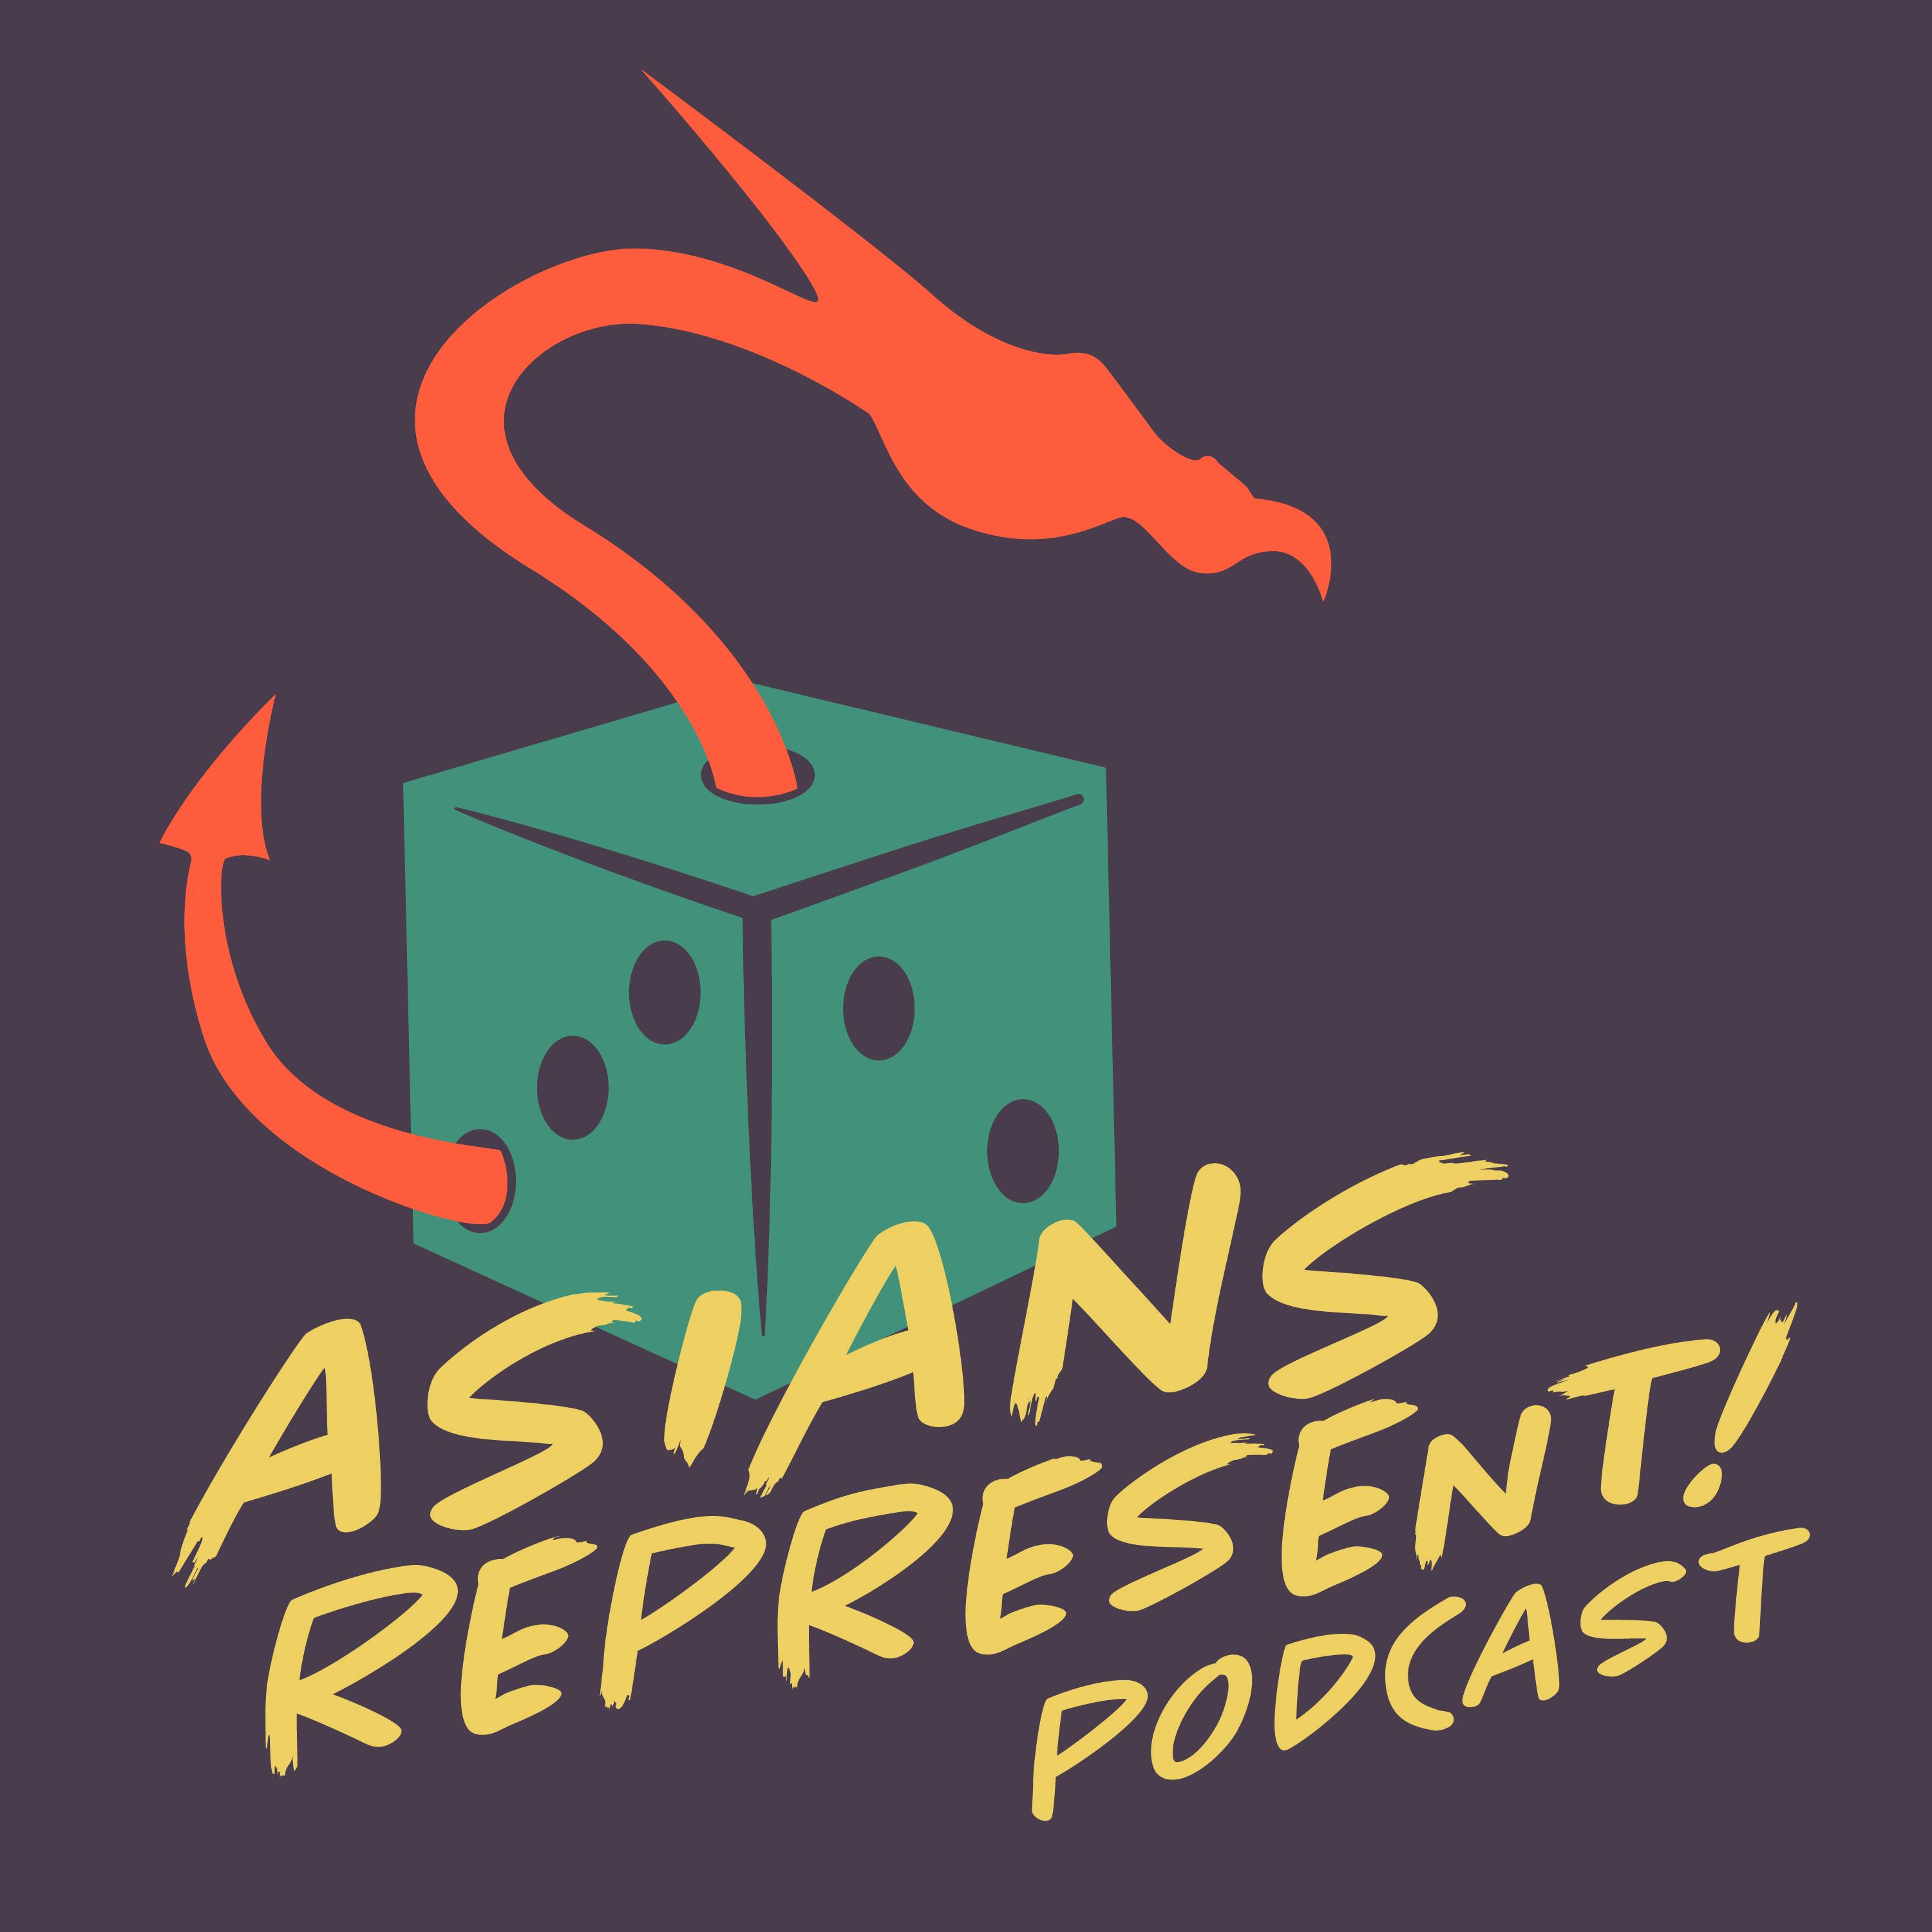 What is orientalism? | Definitions by Asians Represent!